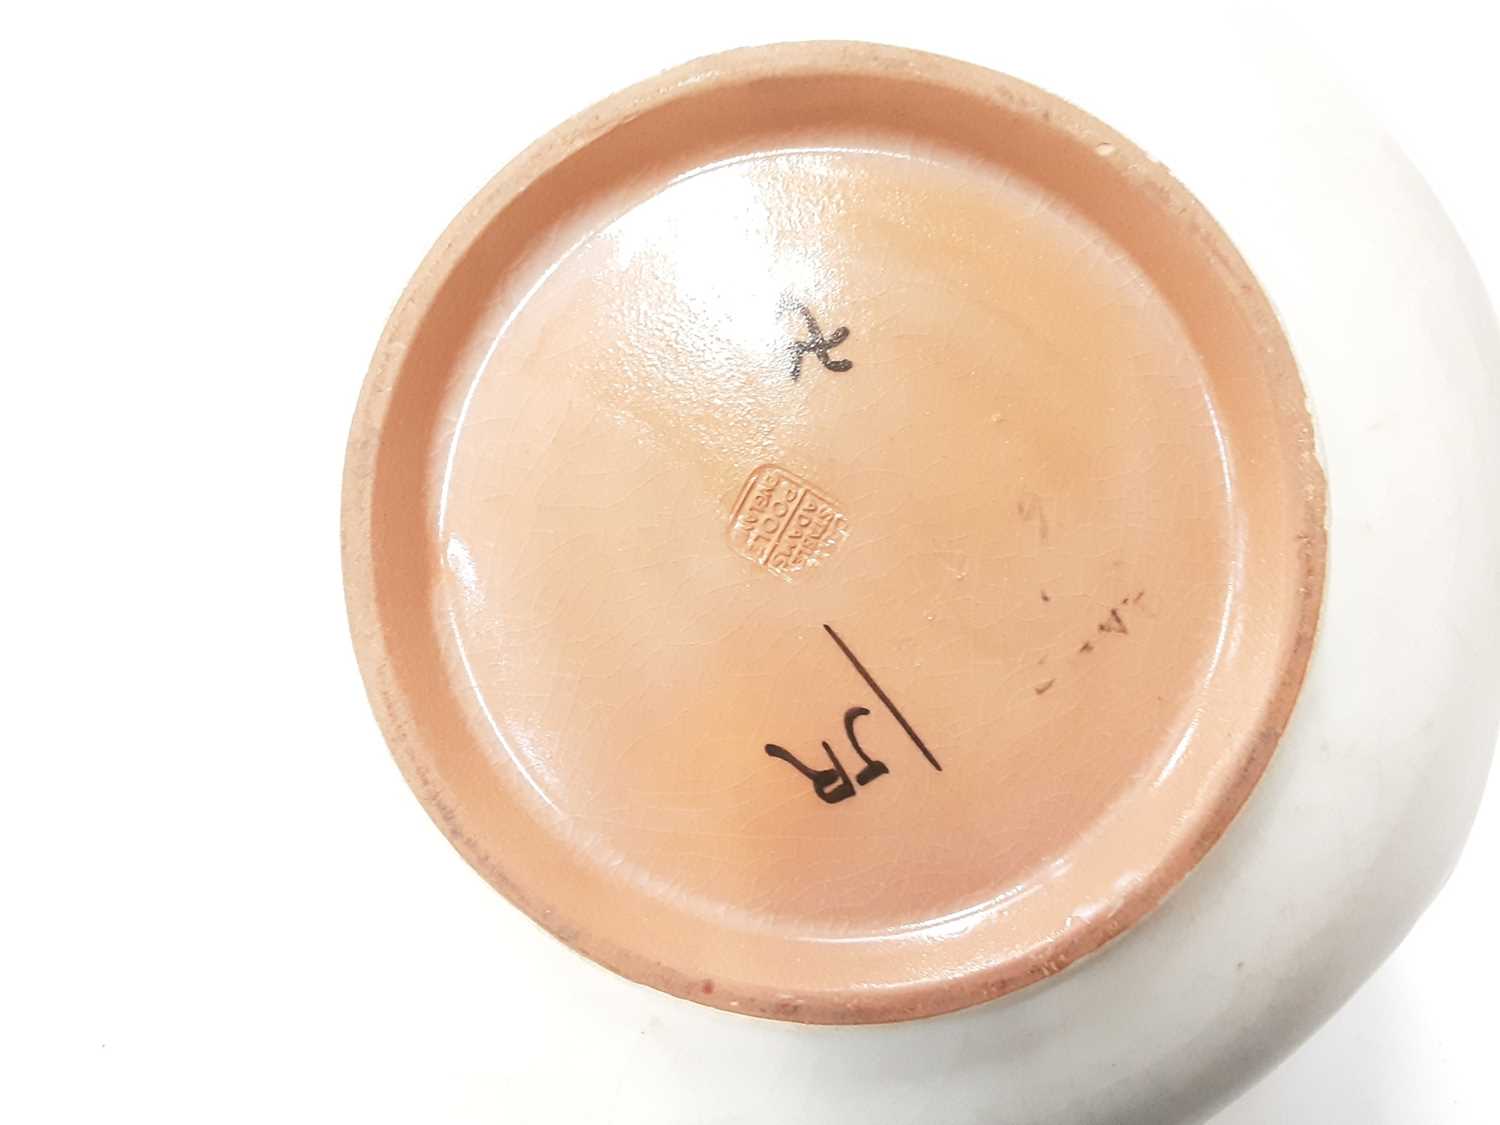 Carter Stabler Adams Poole Pottery vase by Ruth Pavely - Image 2 of 2